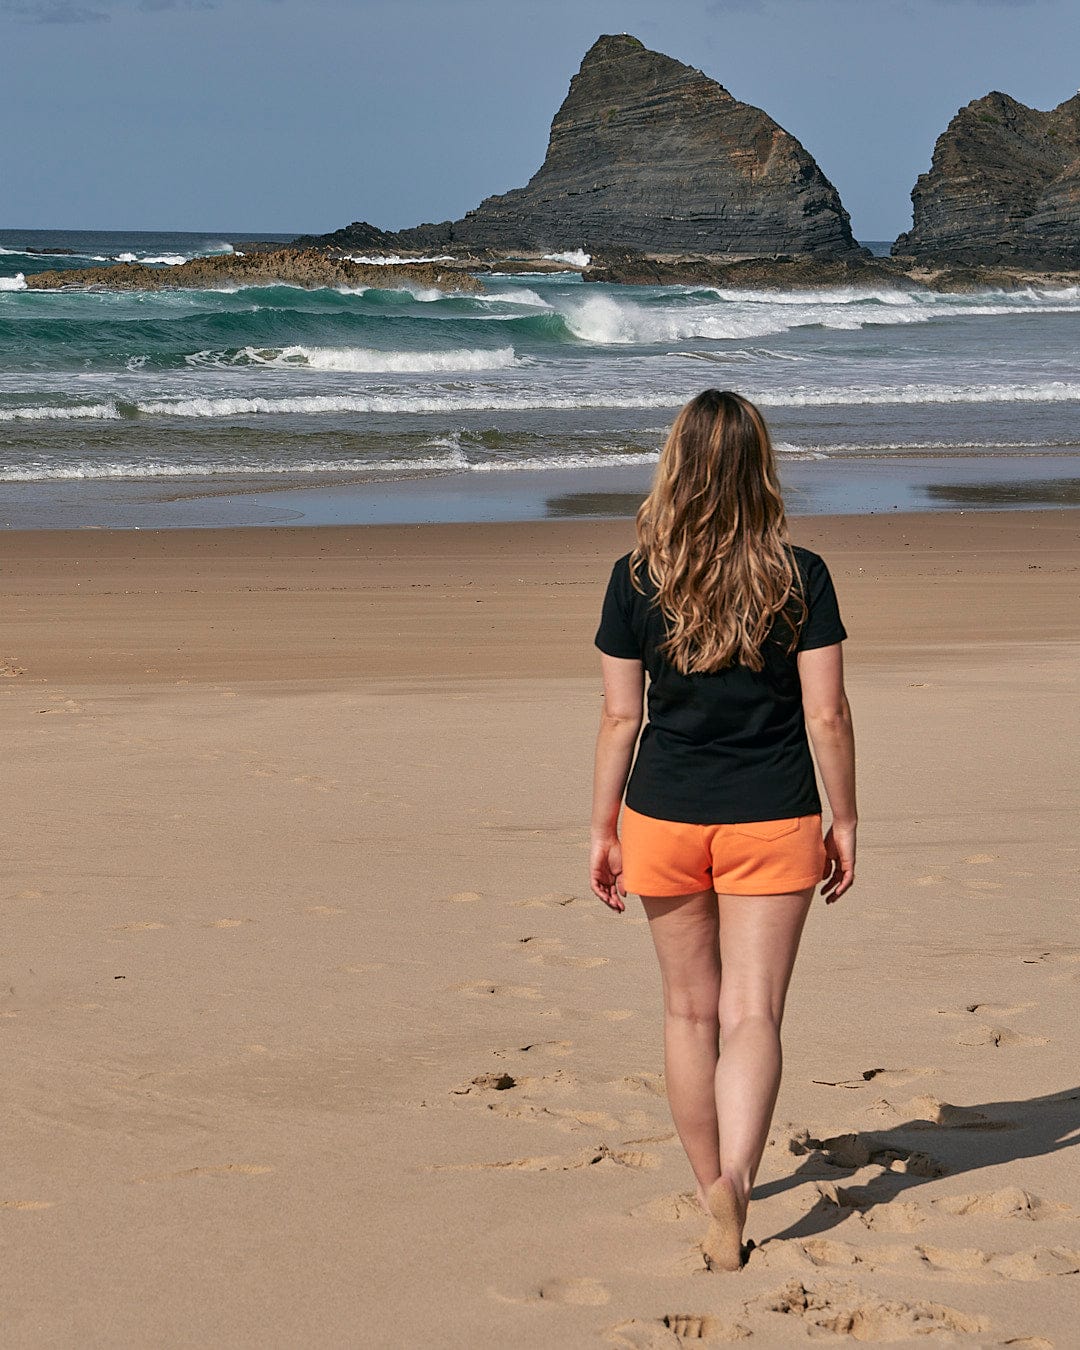 A woman walking on a beach wearing the Purfect Wave Gradient - Womens Short Sleeve T-Shirt in Black by Saltrock.